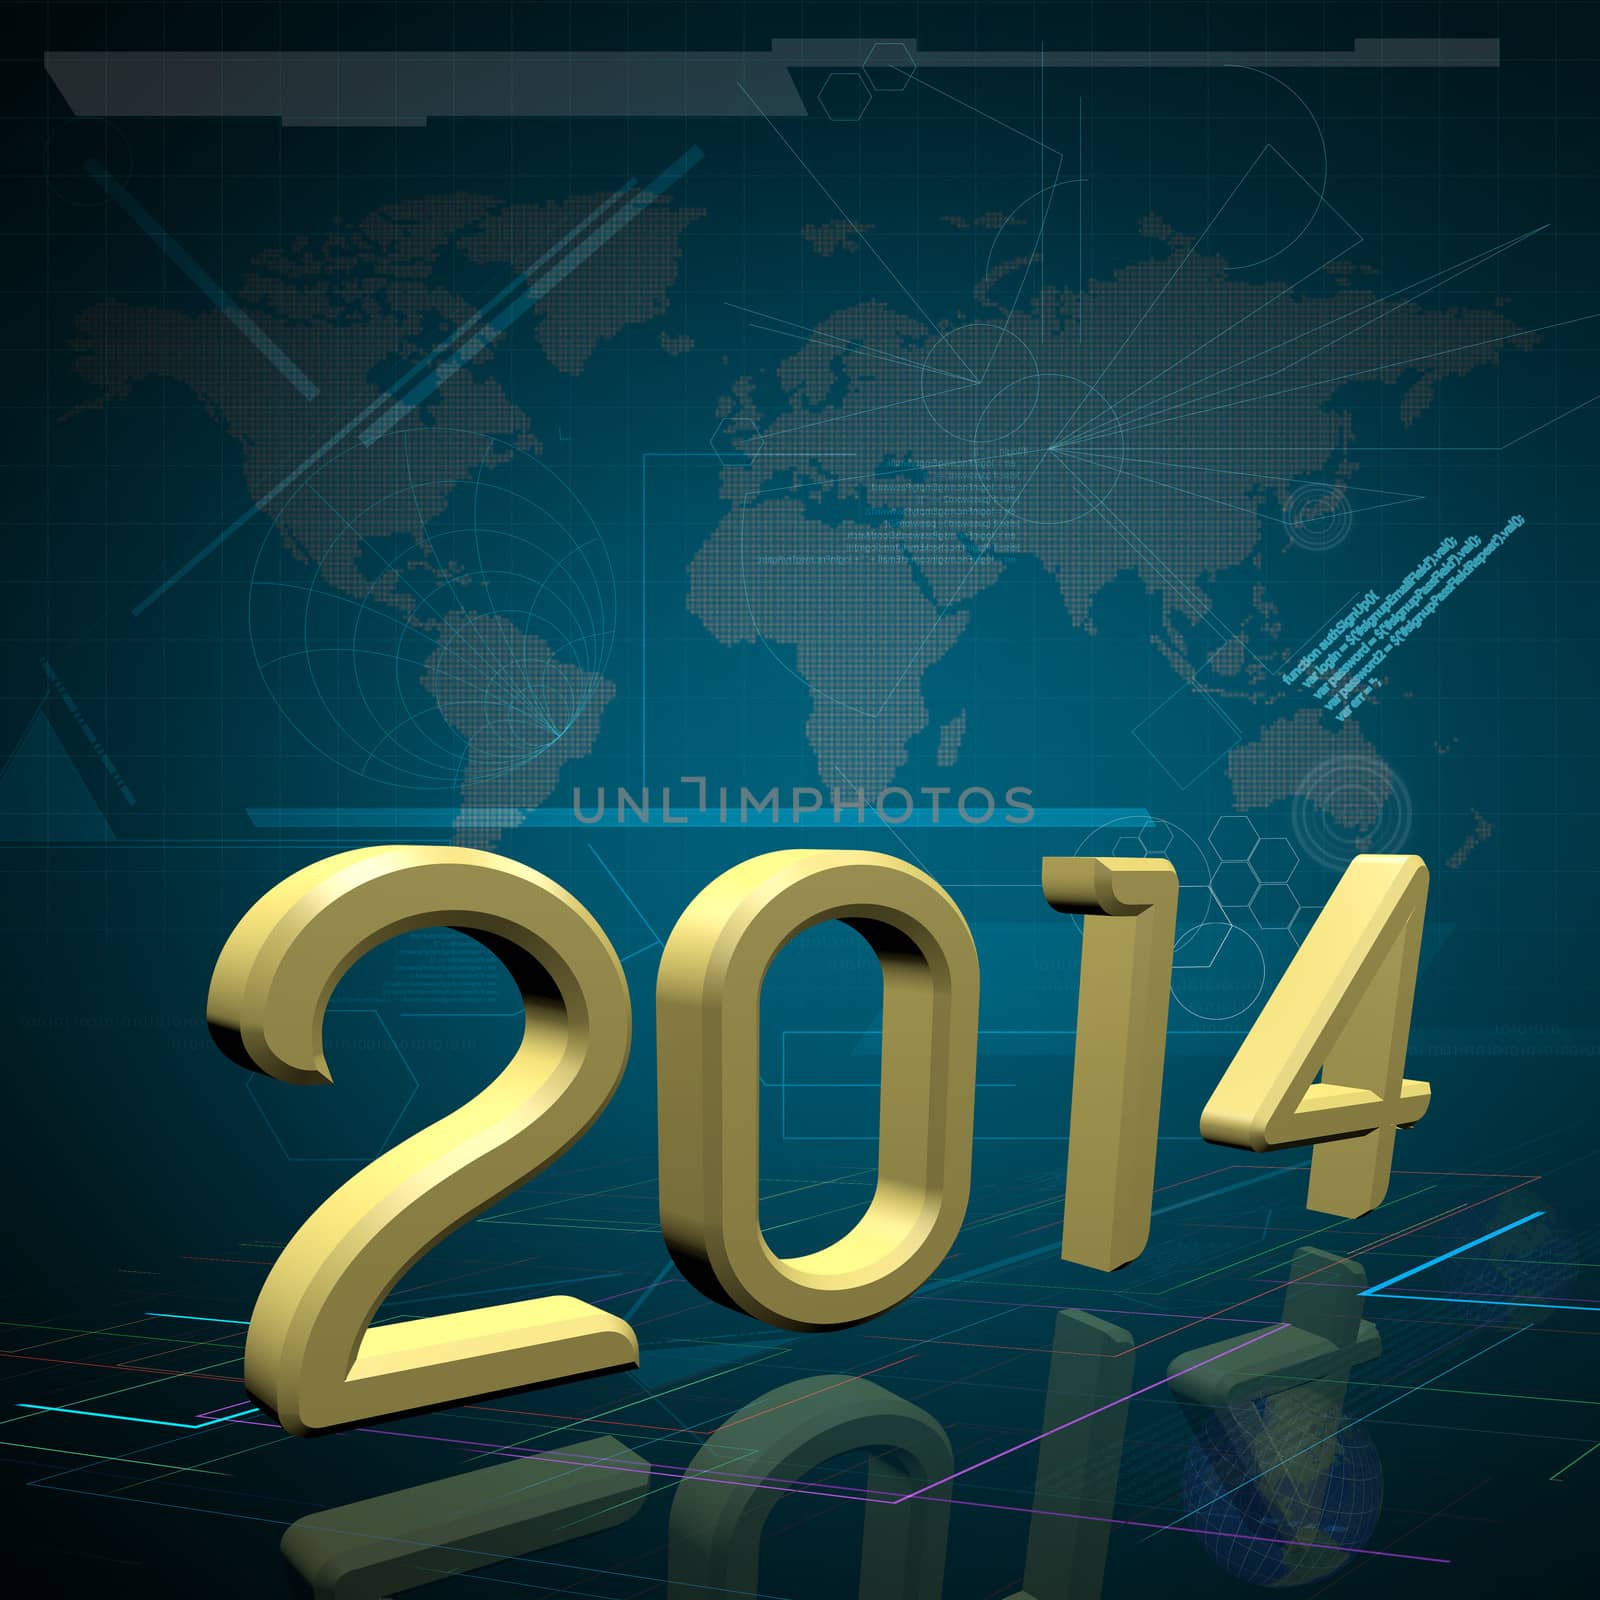 2014 the Year on Technology Background